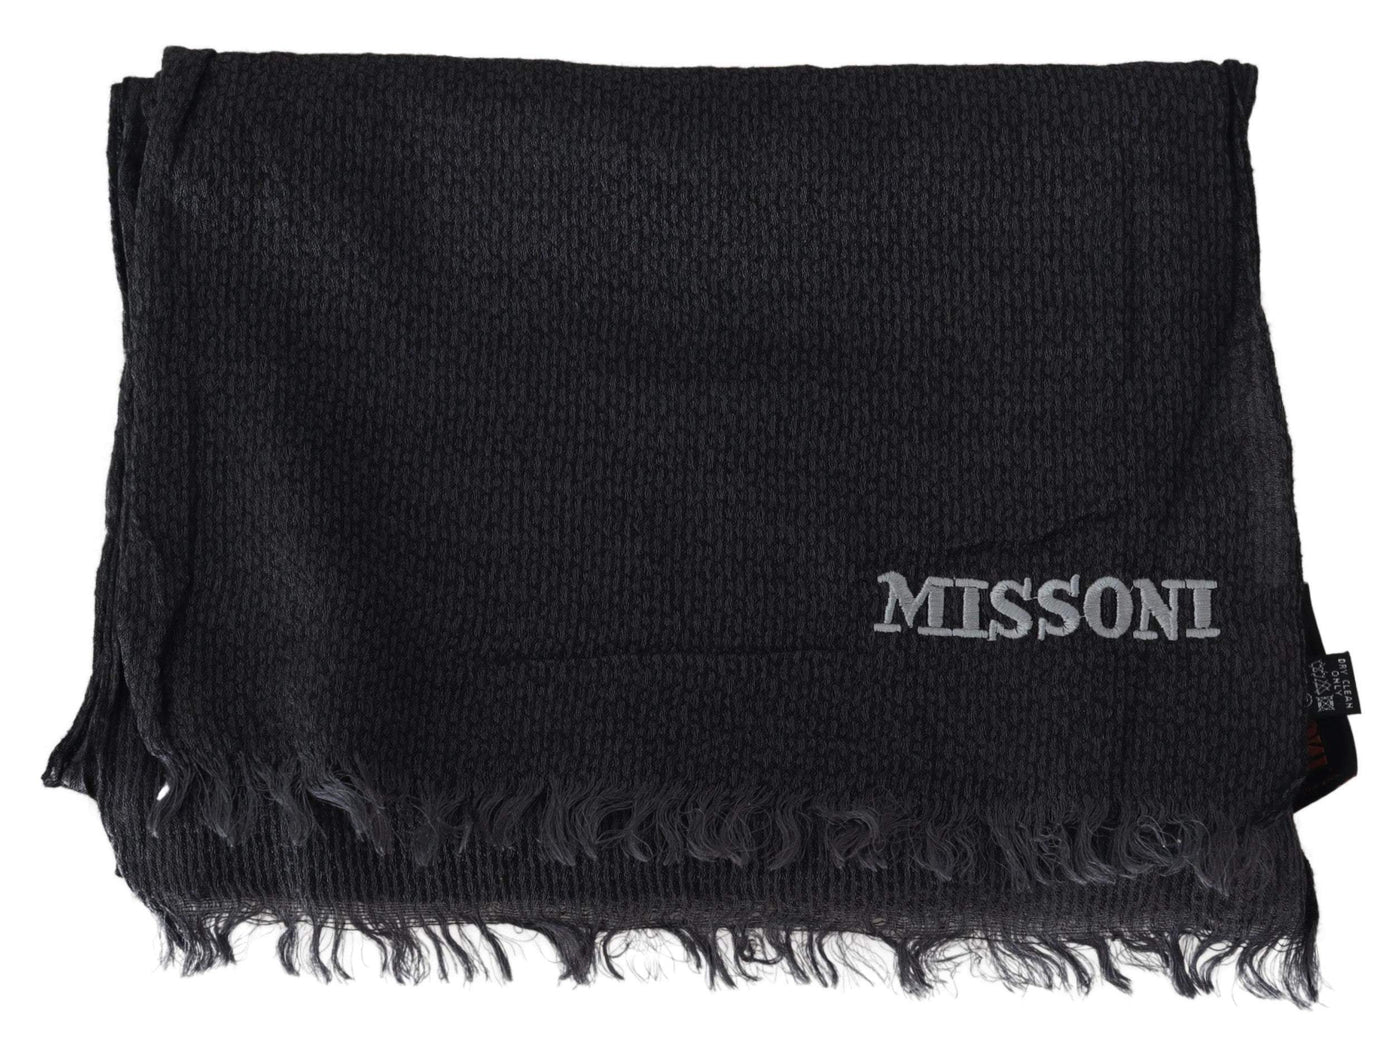 Missoni Black Wool Knit Unisex Neck Wrap Scarf #men, Accessories - New Arrivals, Black, feed-agegroup-adult, feed-color-Black, feed-gender-male, Missoni, Scarves - Men - Accessories at SEYMAYKA